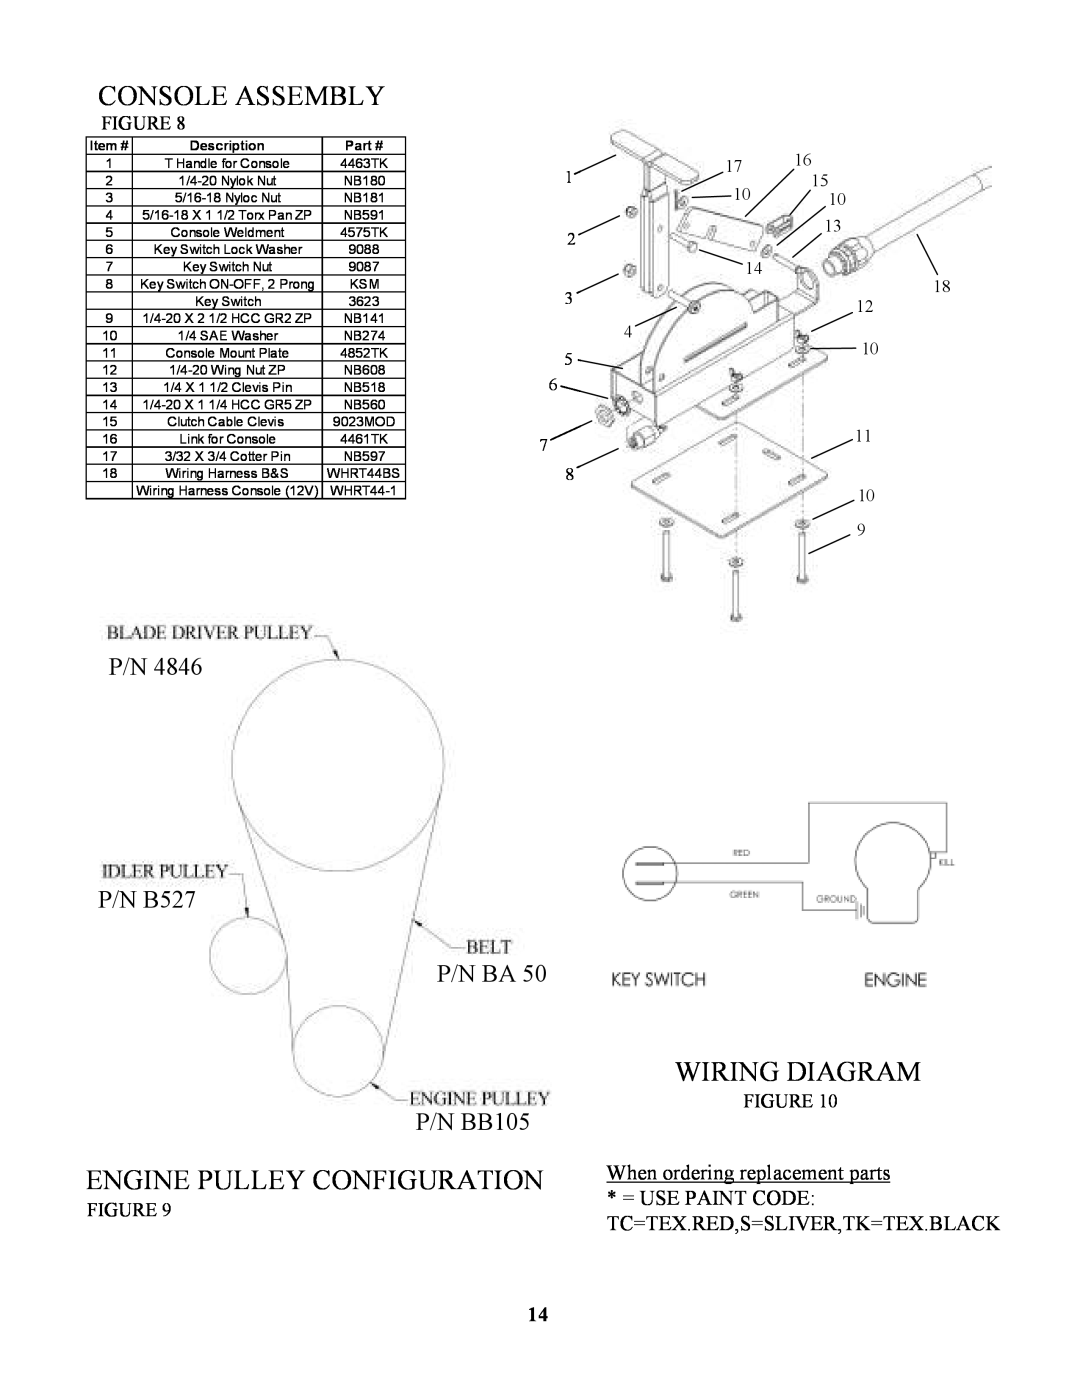 Swisher RTB1254412V, POLB10544HD, RTB105441 Console Assembly, Wiring Diagram, Engine Pulley Configuration, P/N BB105 